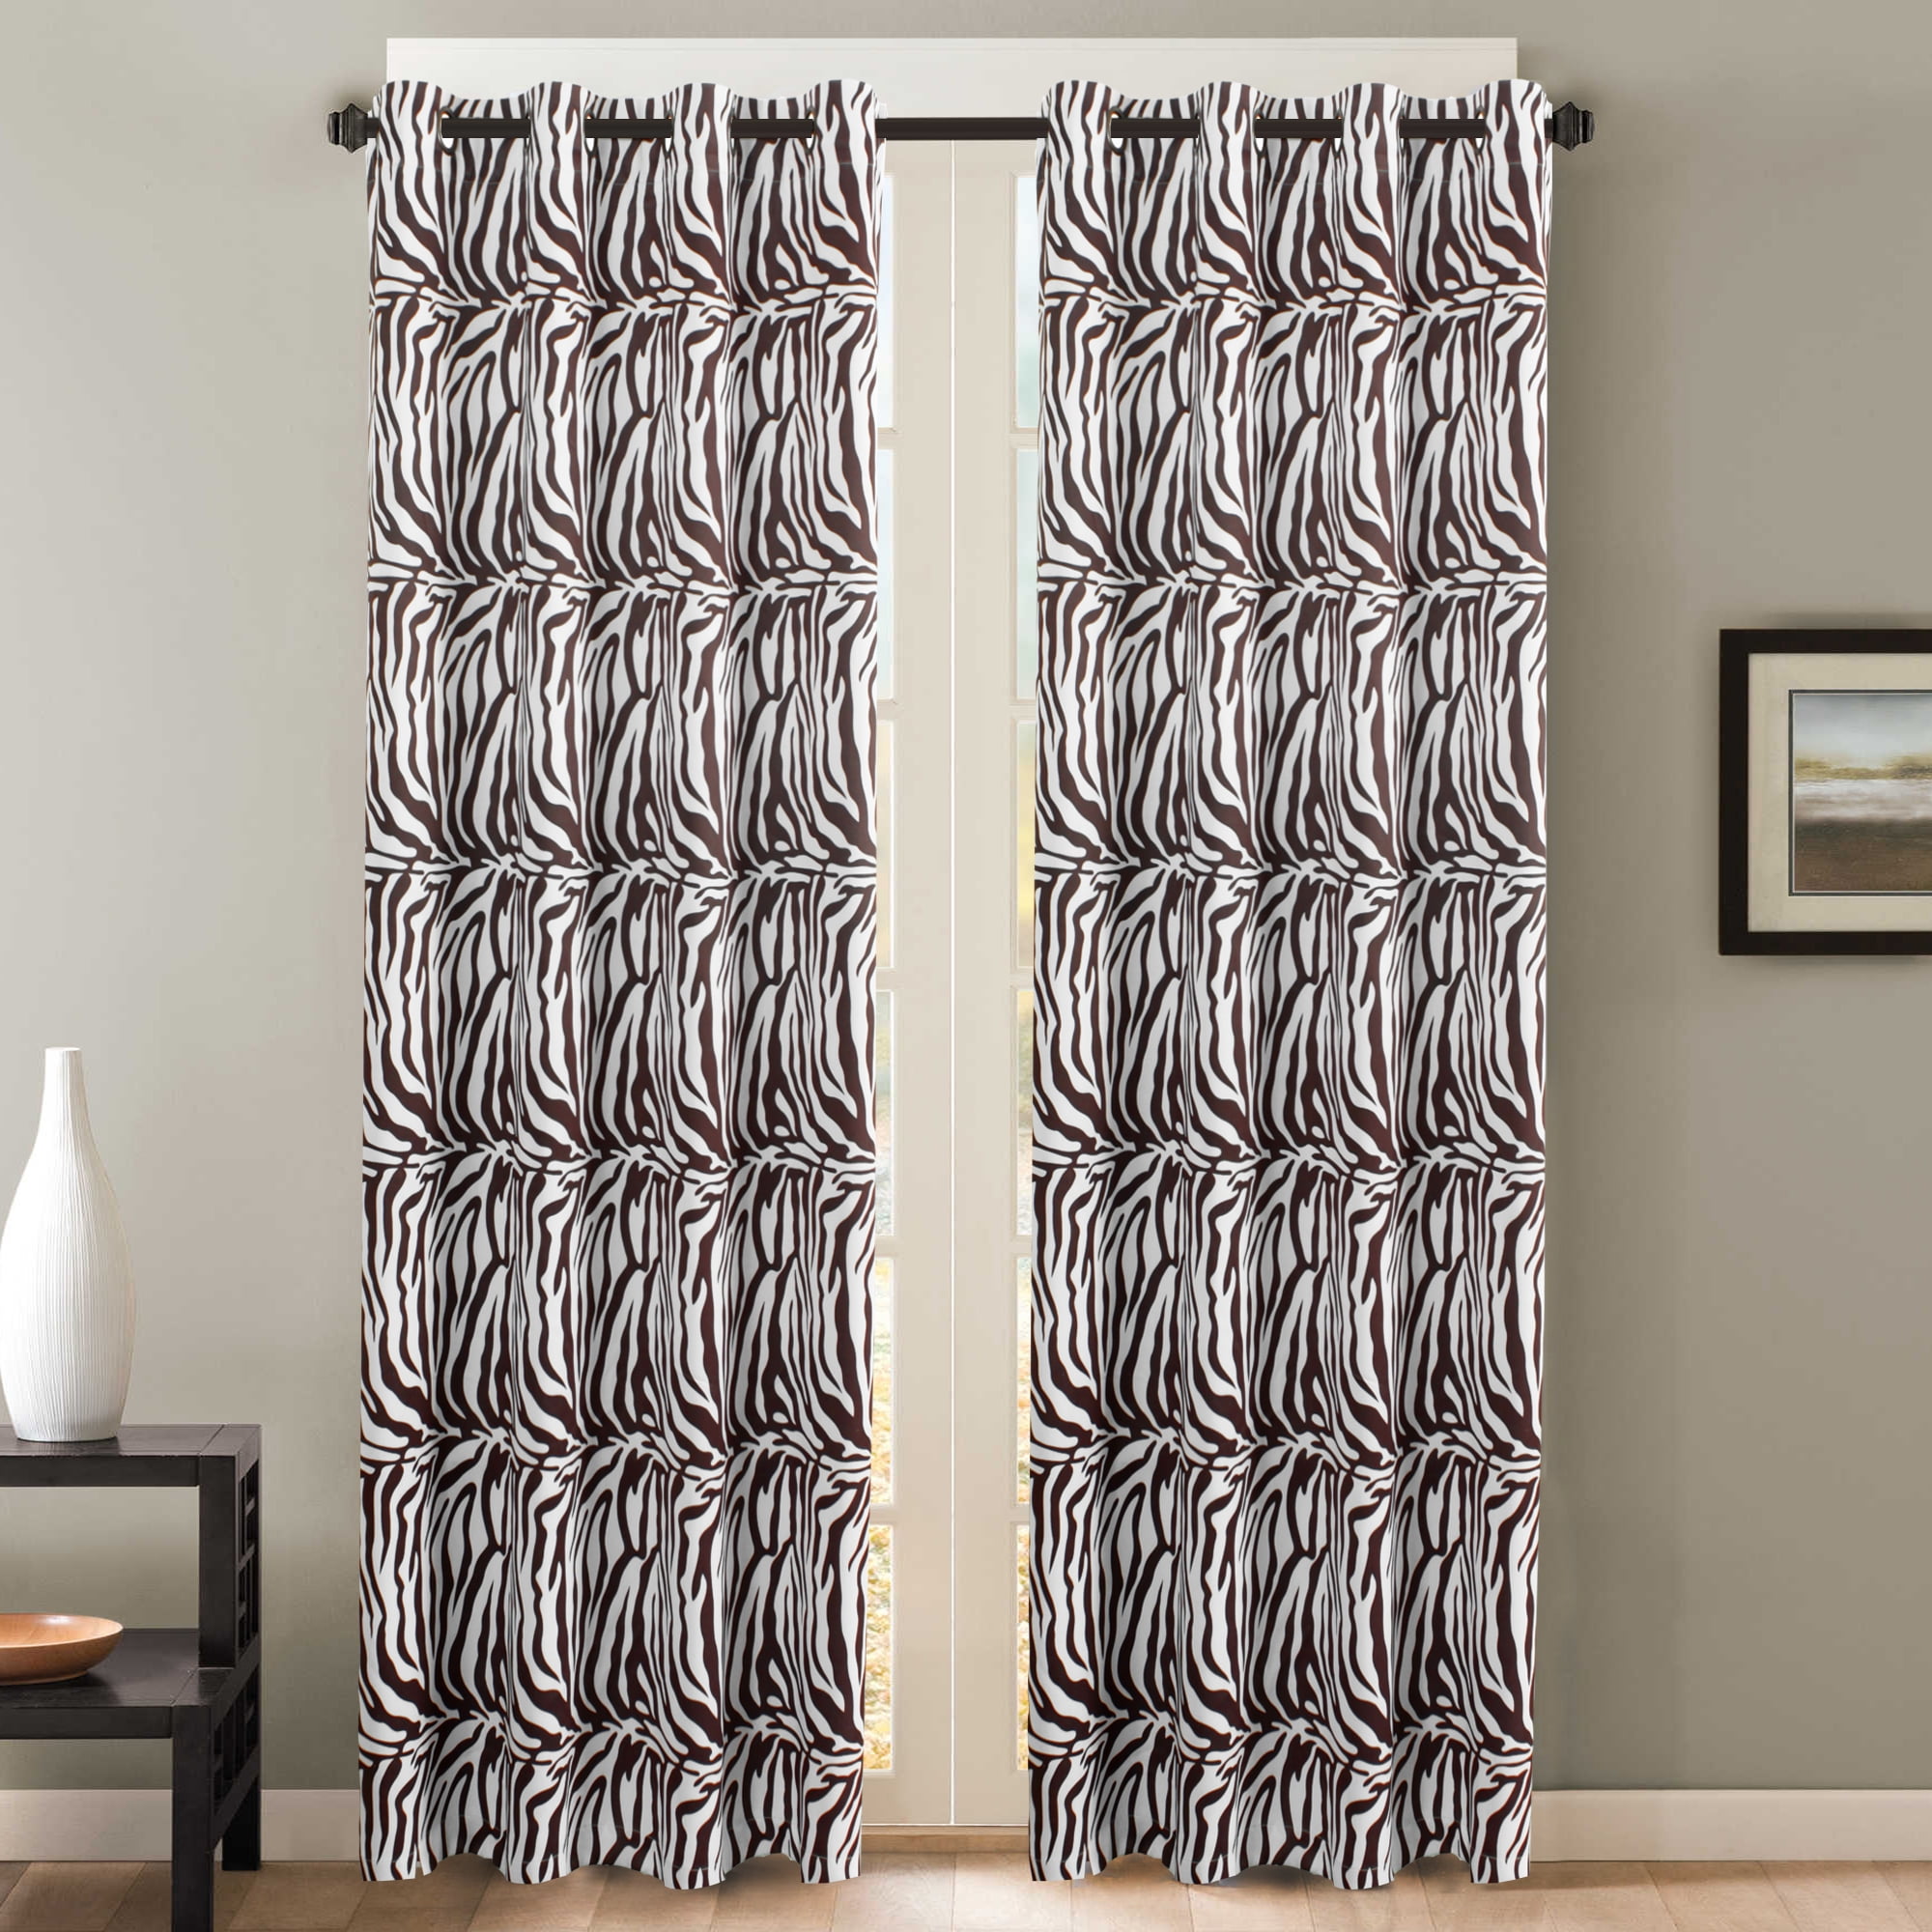 H.VERSAILTEX Blackout Curtains for Living Room / Bedroom Thermal ...